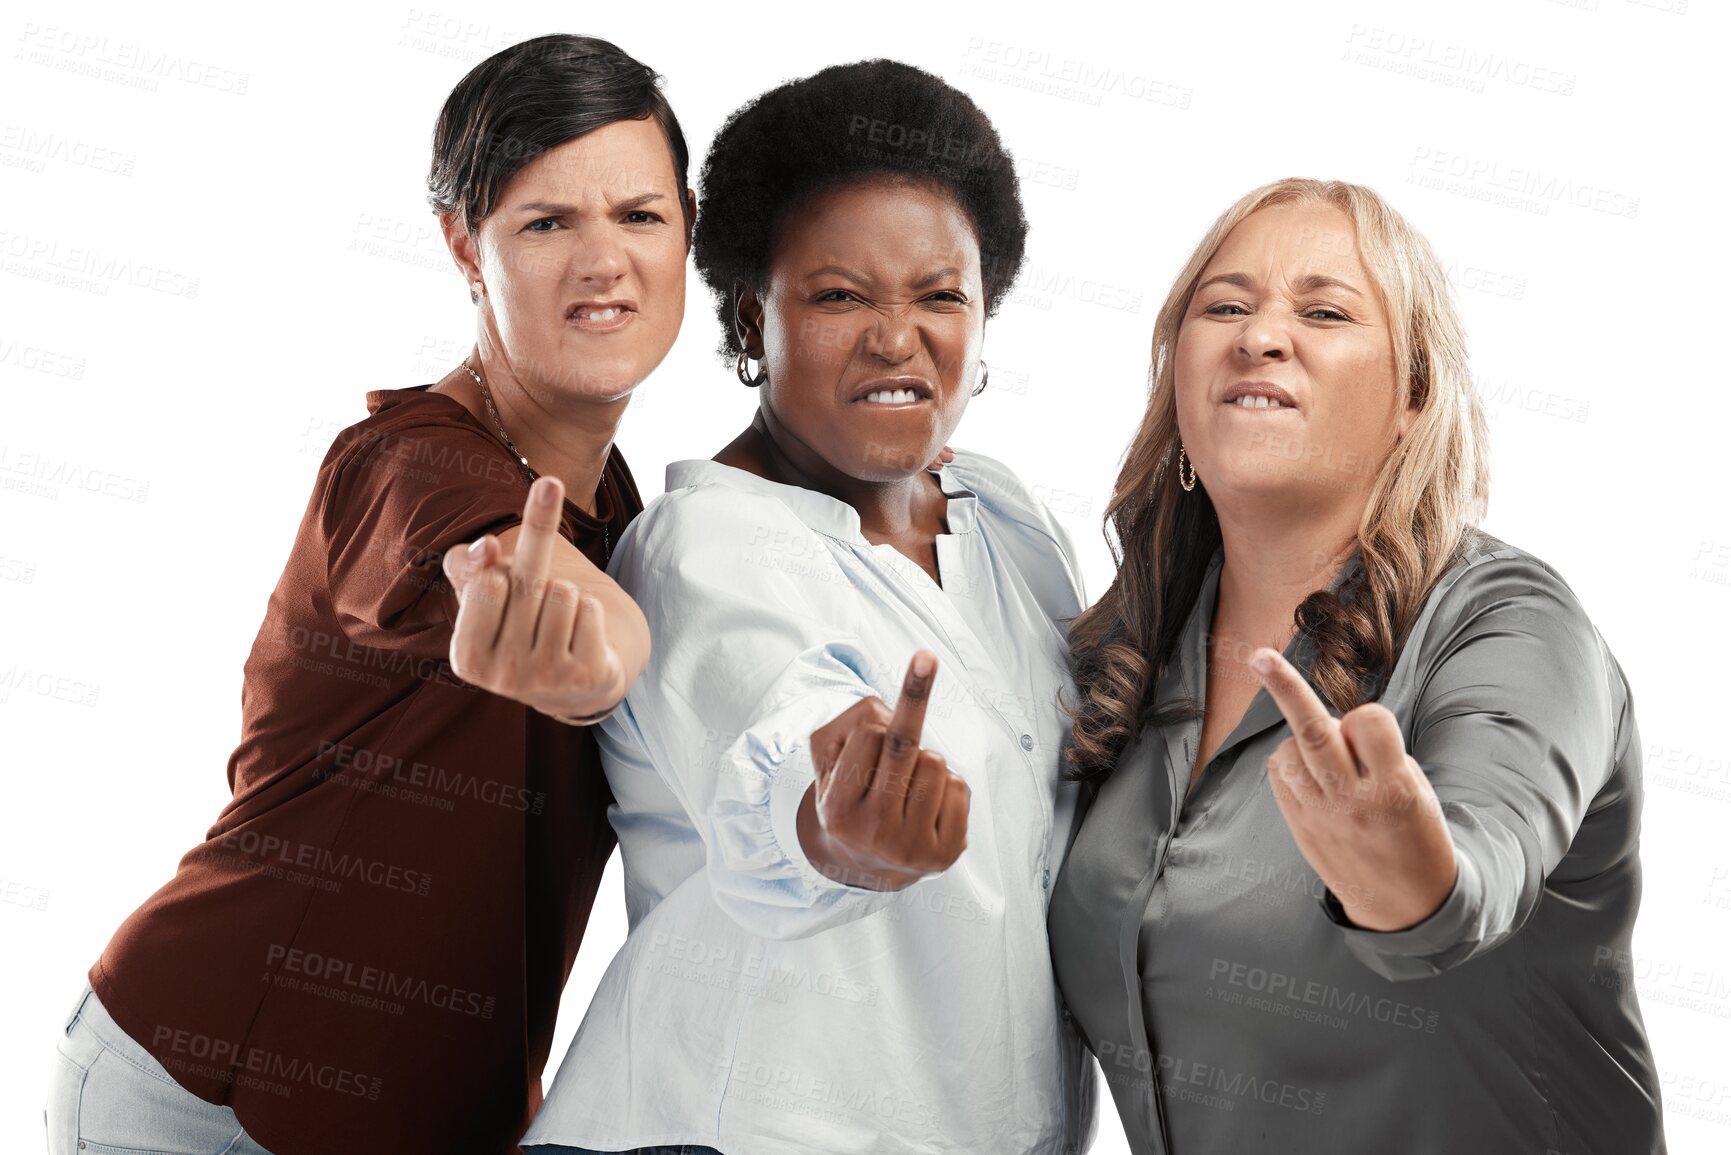 Buy stock photo Middle finger, portrait and angry women for solidarity, conflict, problem or business frustration. Group of people anger, diversity and rude or frustrated emoji isolated on transparent png background